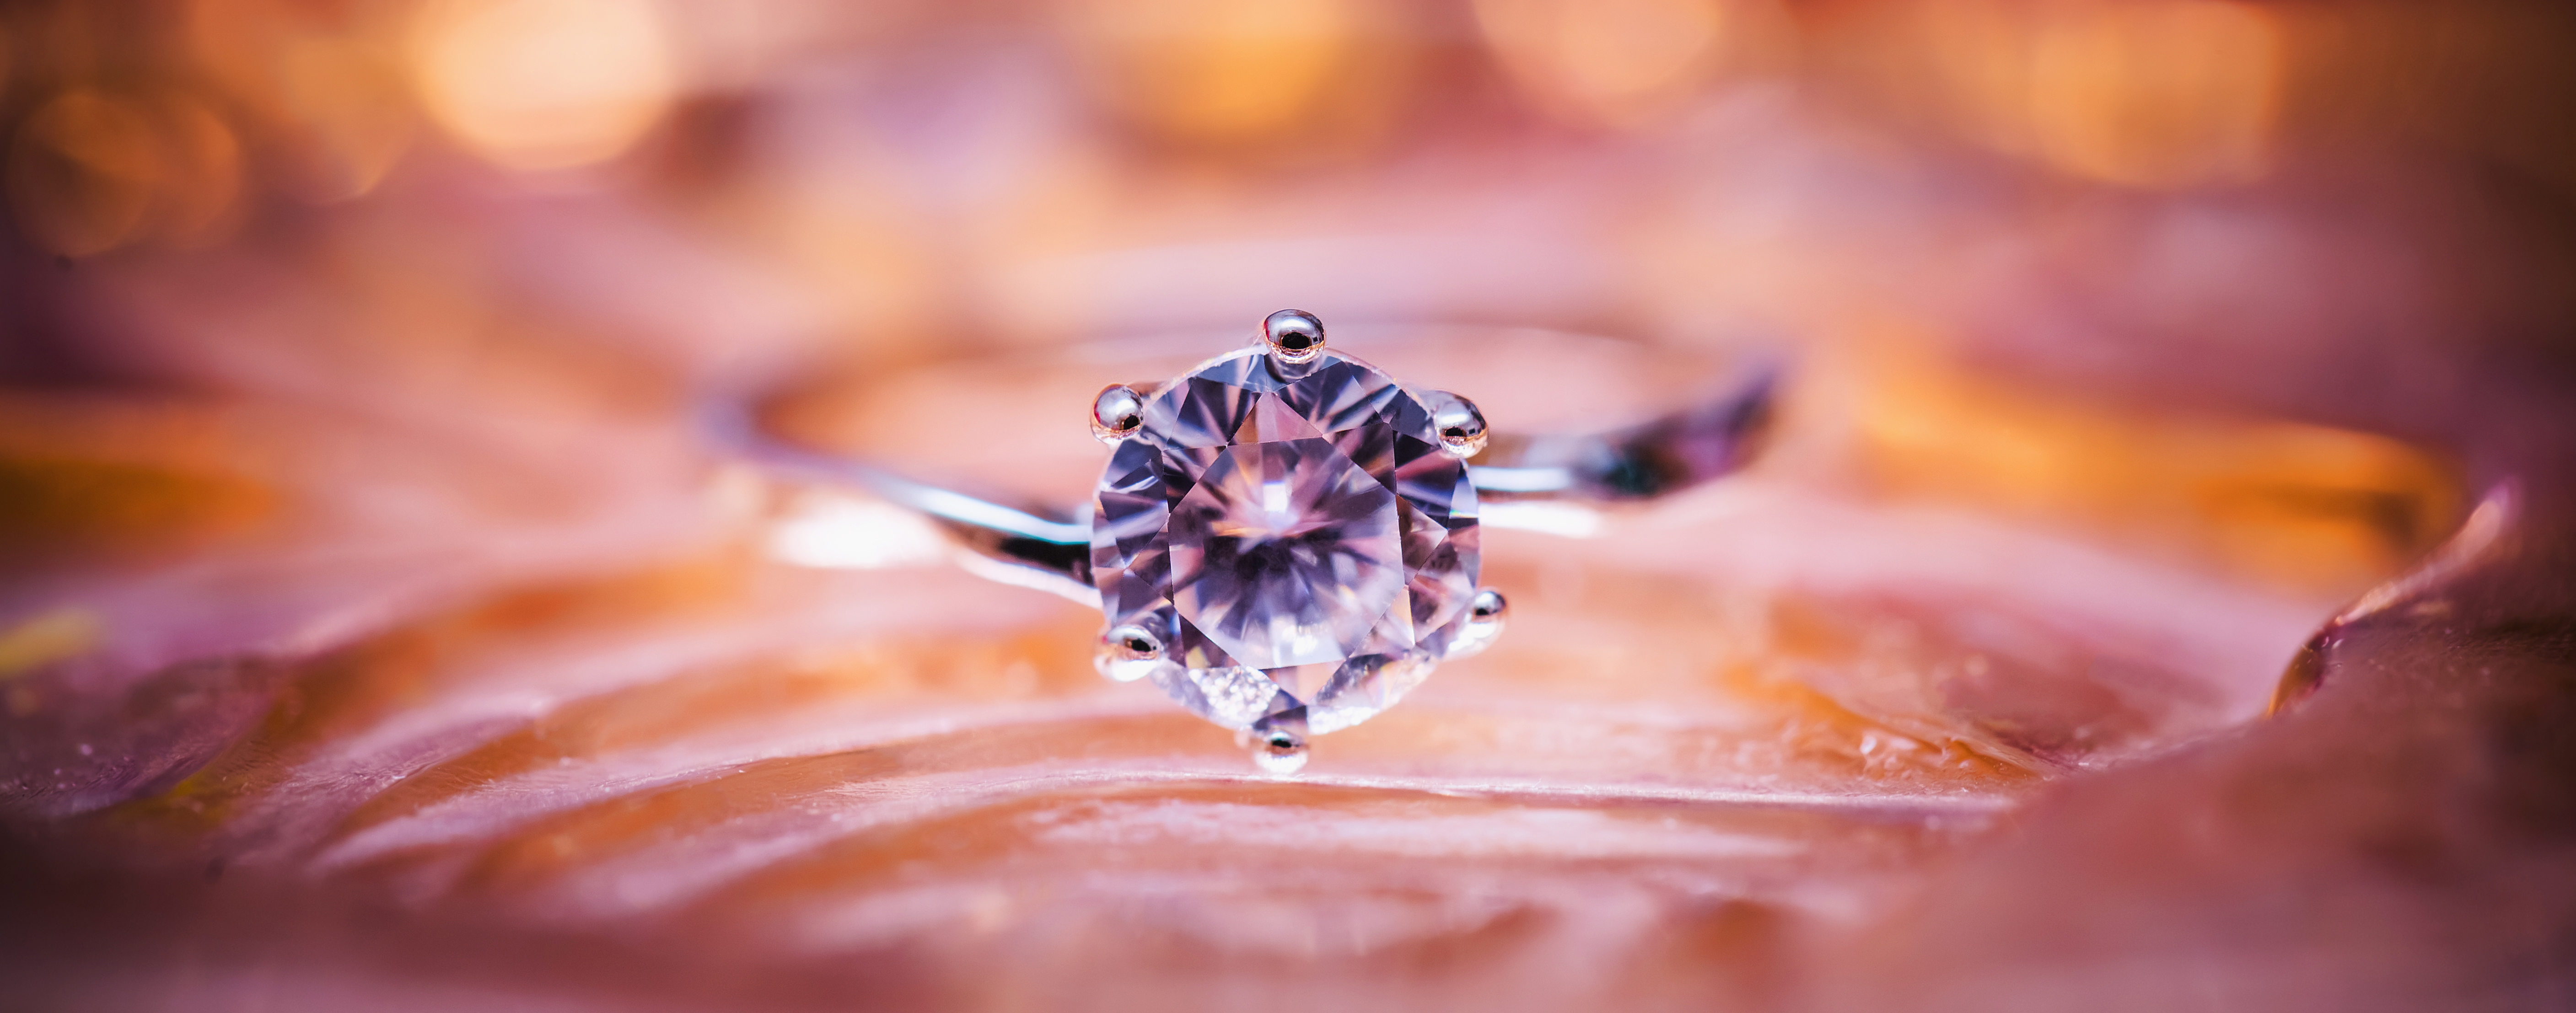 Ringshot, engaged, sand, diamond ring by Maile Marie Photography. Photo  stock - StudioNow